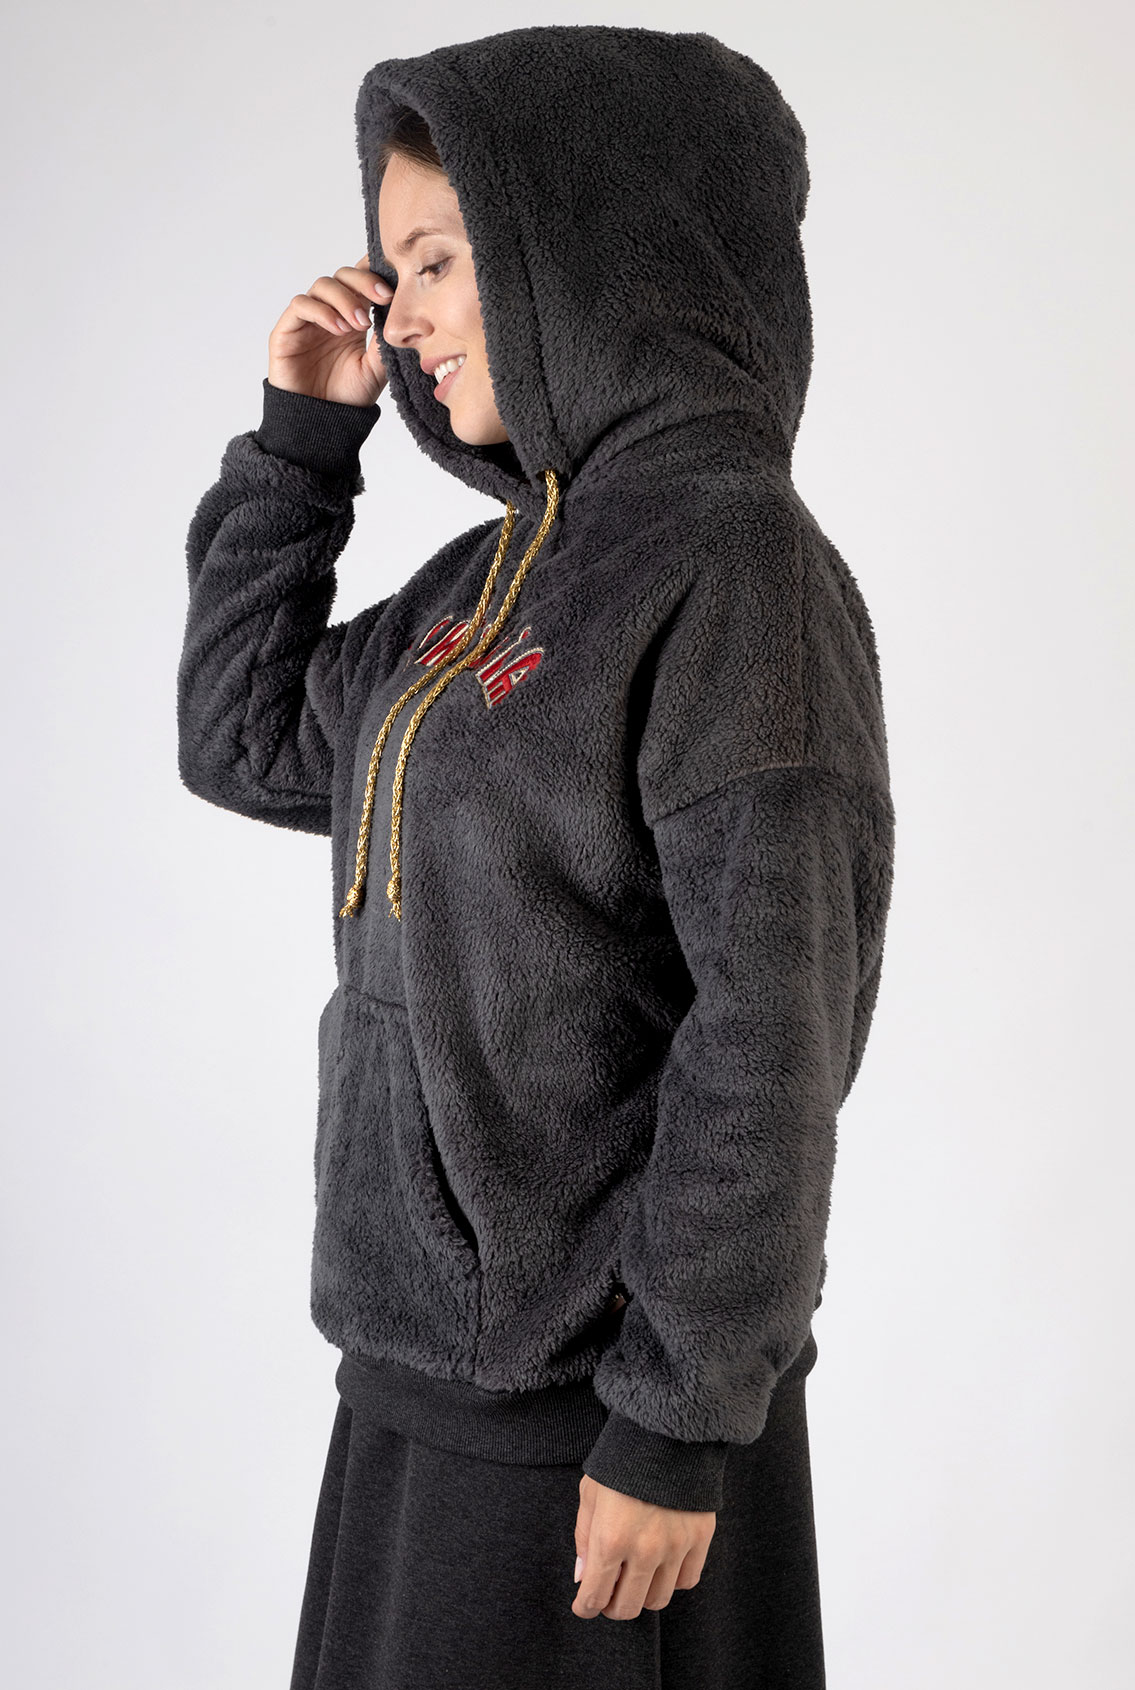 hoodie with Christian symbols